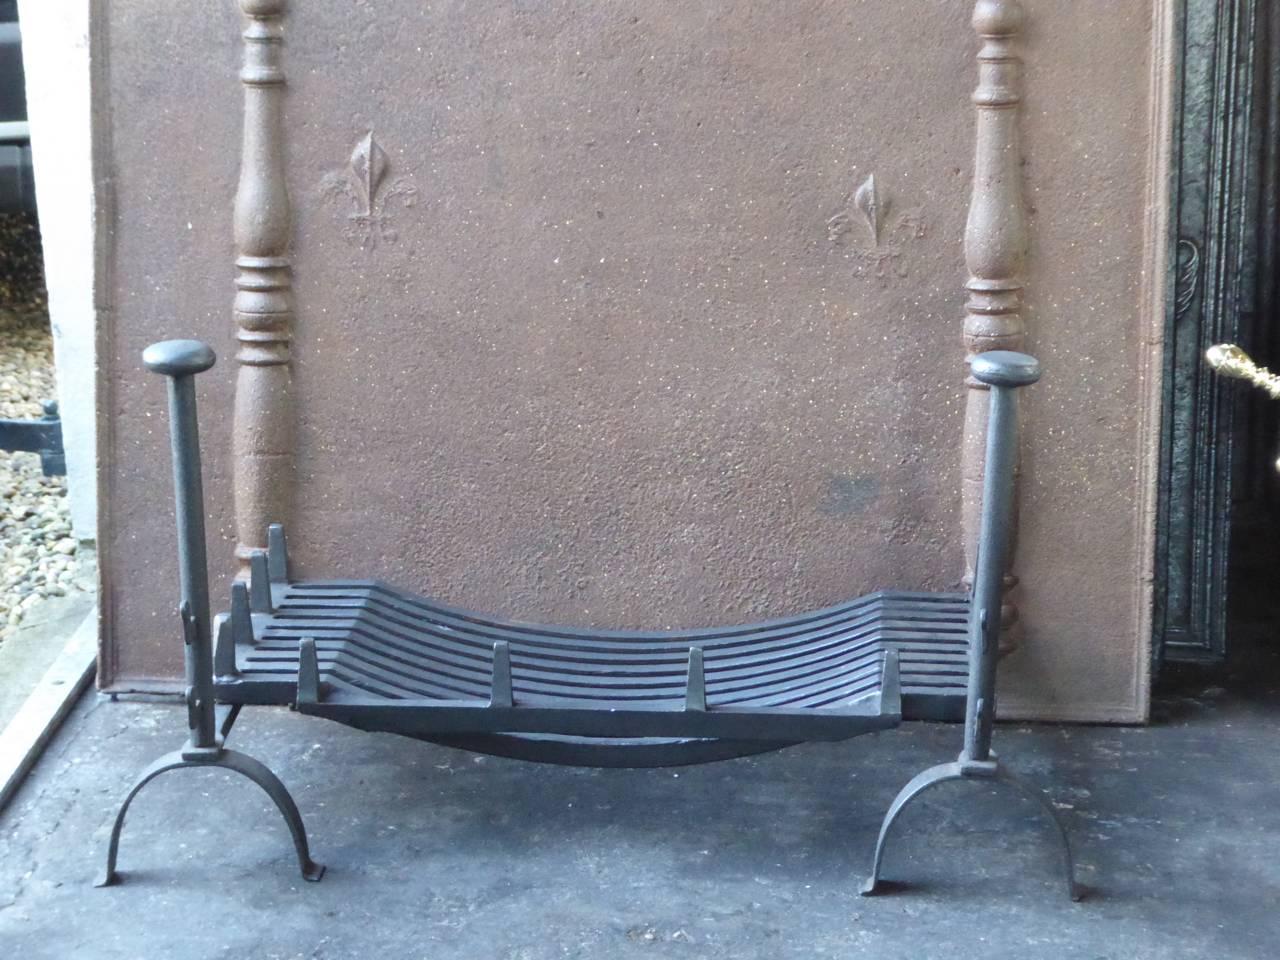 19th century English Victorian fireplace basket made of cast iron and wrought iron. The total width of the front of the grate is 95 cm.

We have a unique and specialized collection of antique and used fireplace accessories consisting of more than